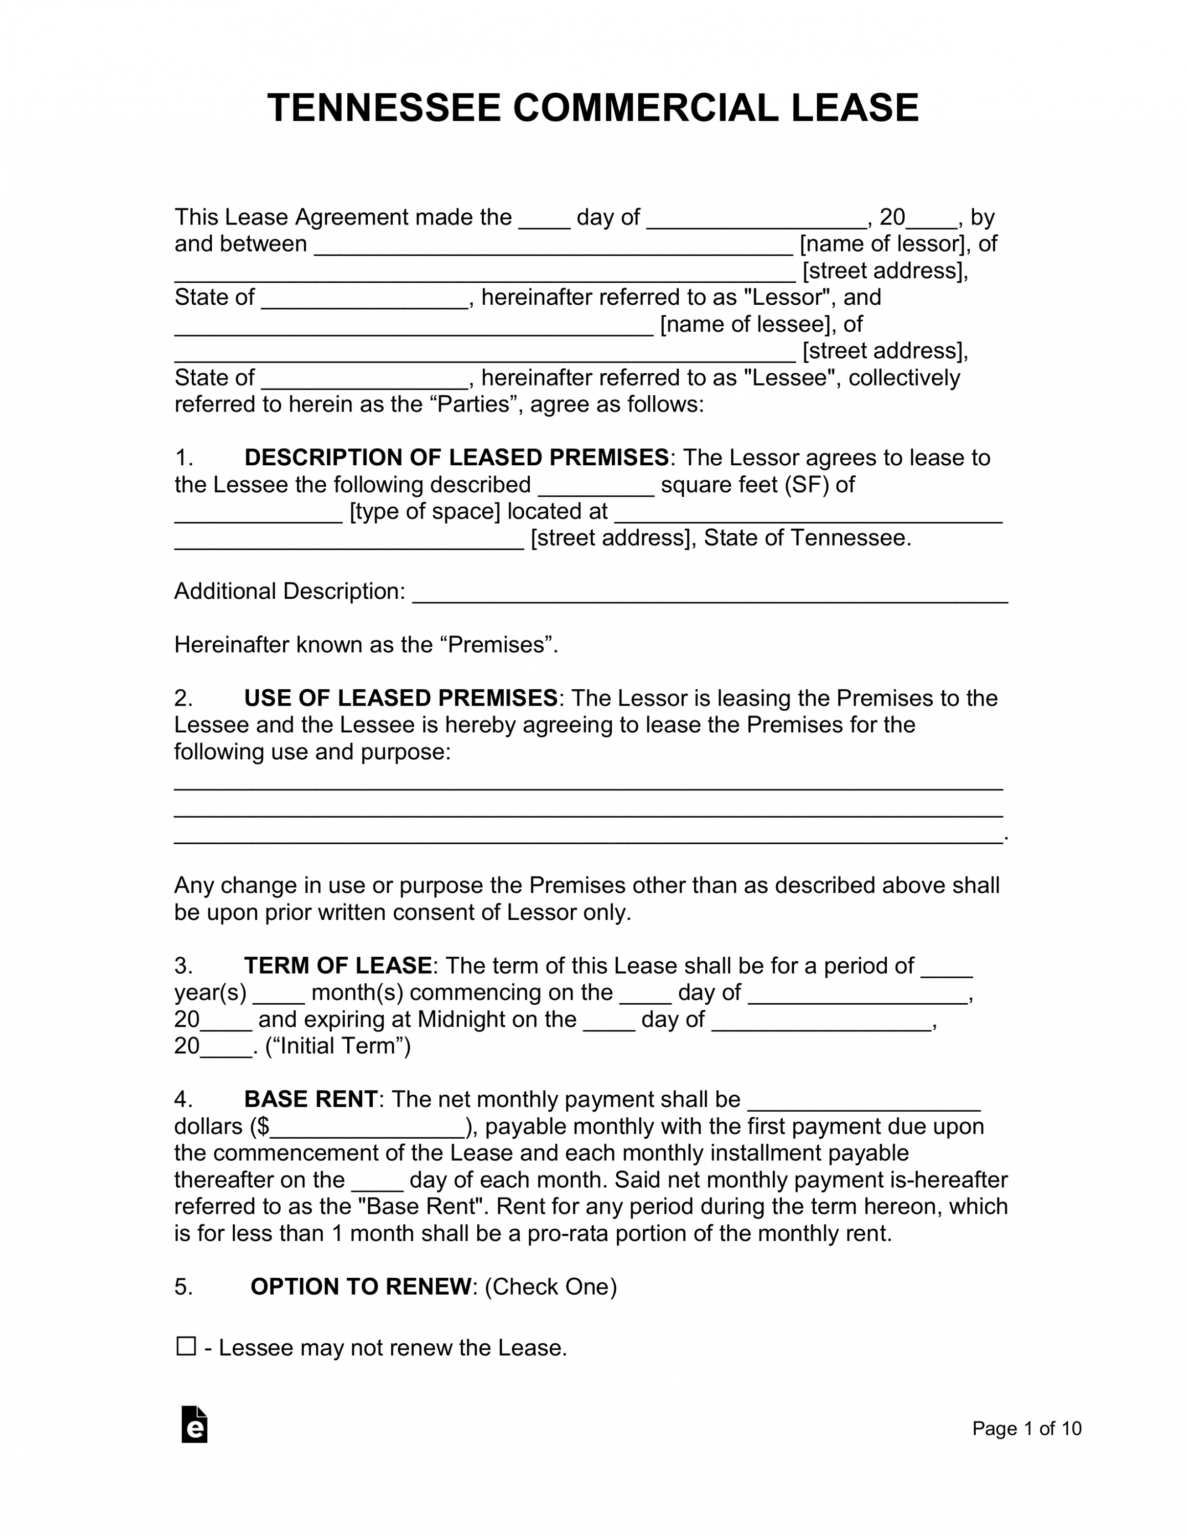 free-tennessee-commercial-lease-agreement-template-pdf-rental-agreement